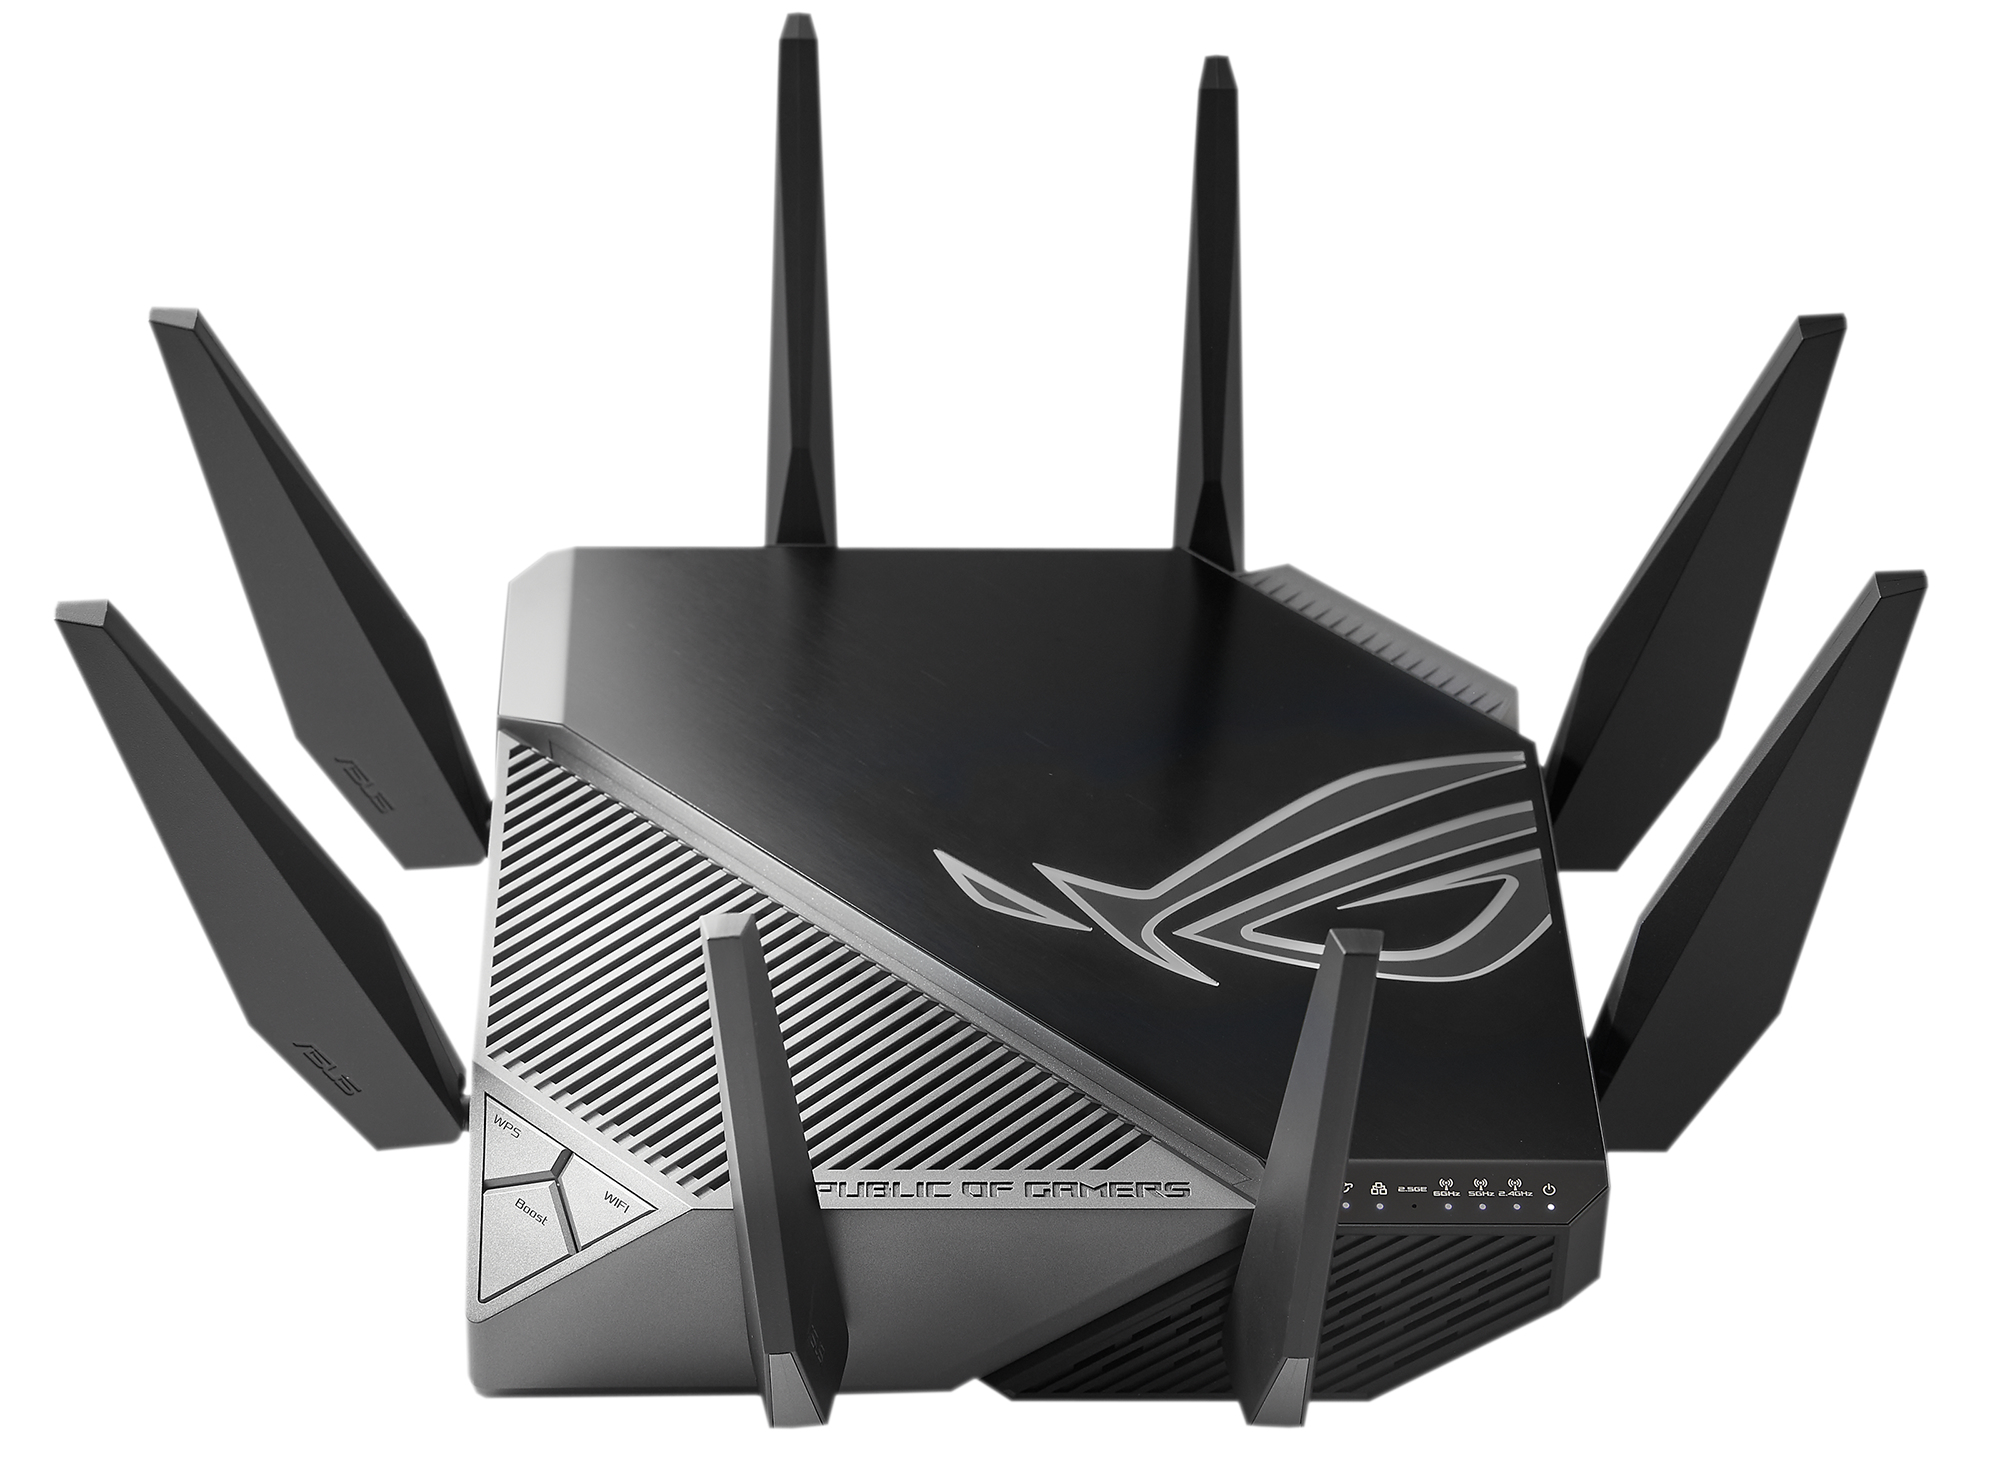 ASUS ROG Rapture GT-AXE11000 - Wireless Router